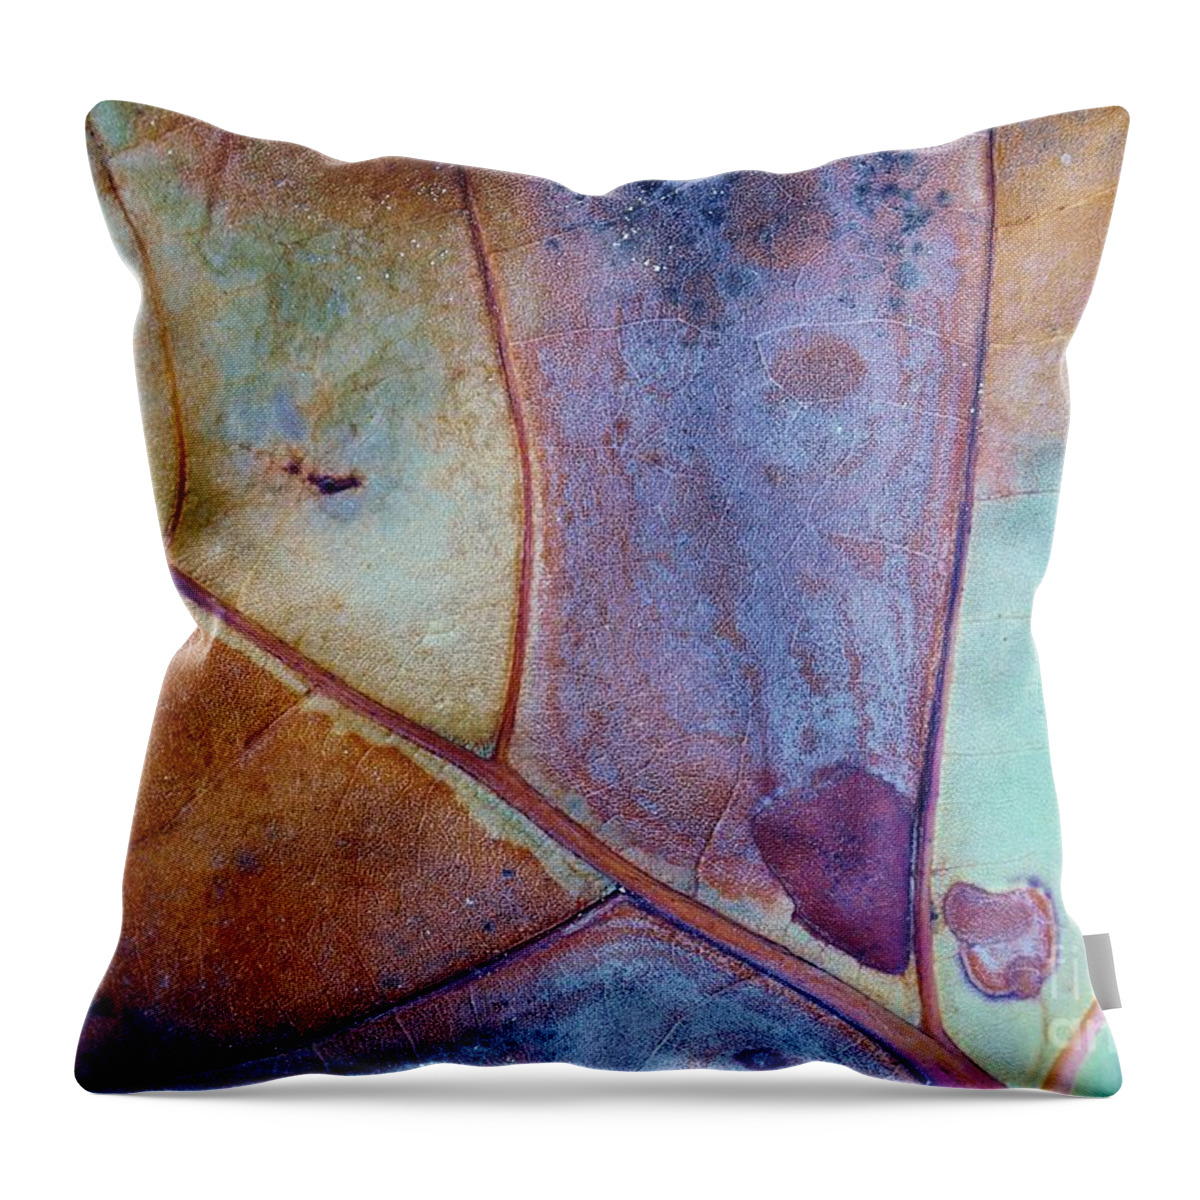 Copper Throw Pillow featuring the painting Copper Patina by John Clark